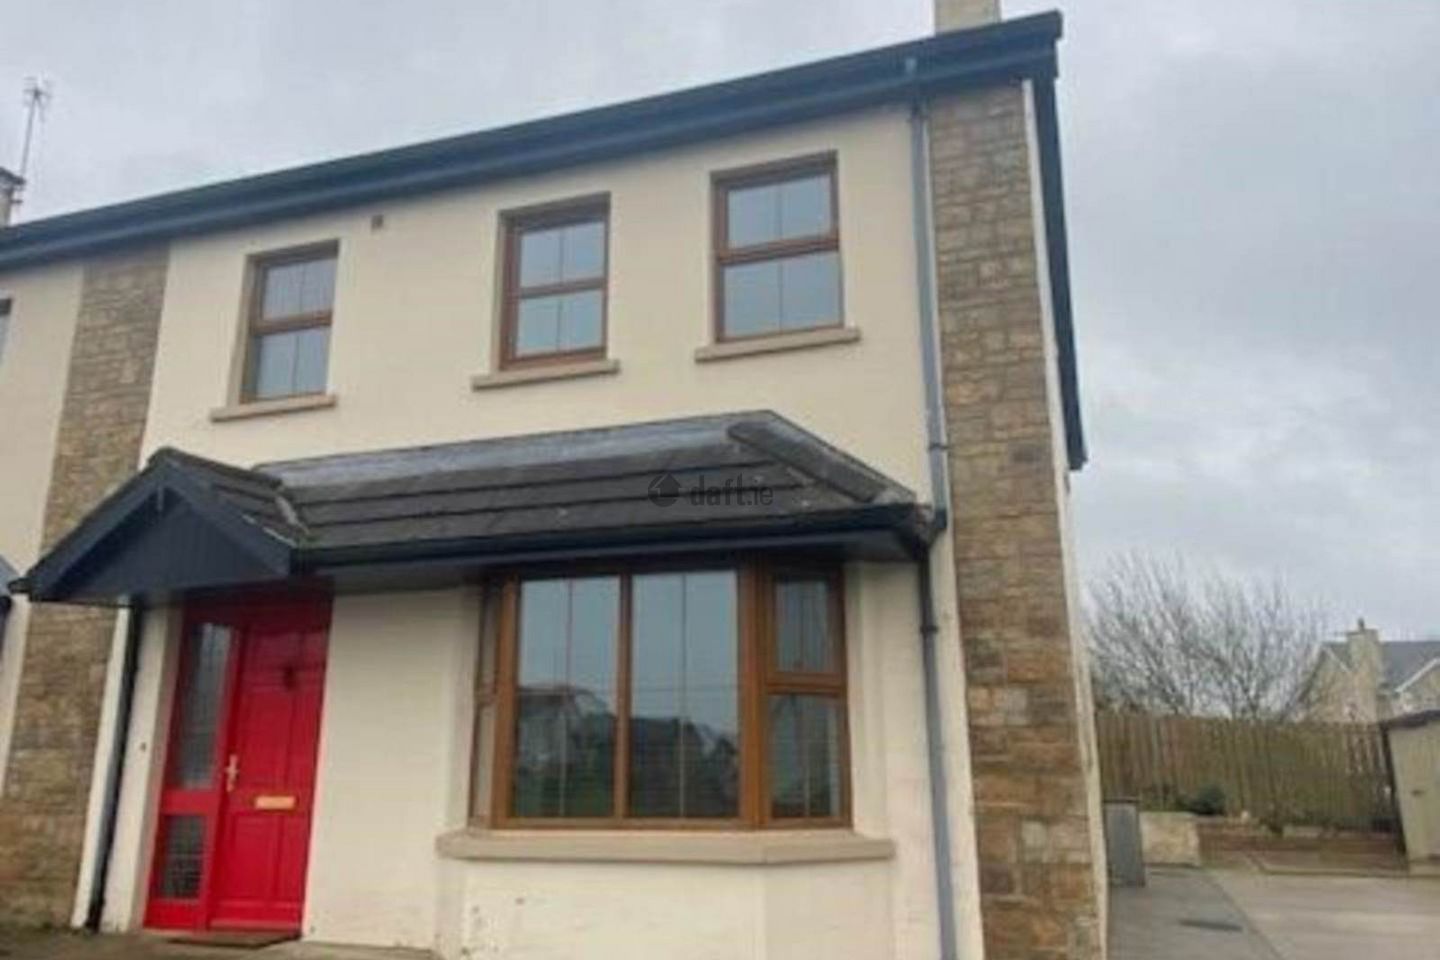 8 Ard Caoin, Manorcunningham, Co. Donegal